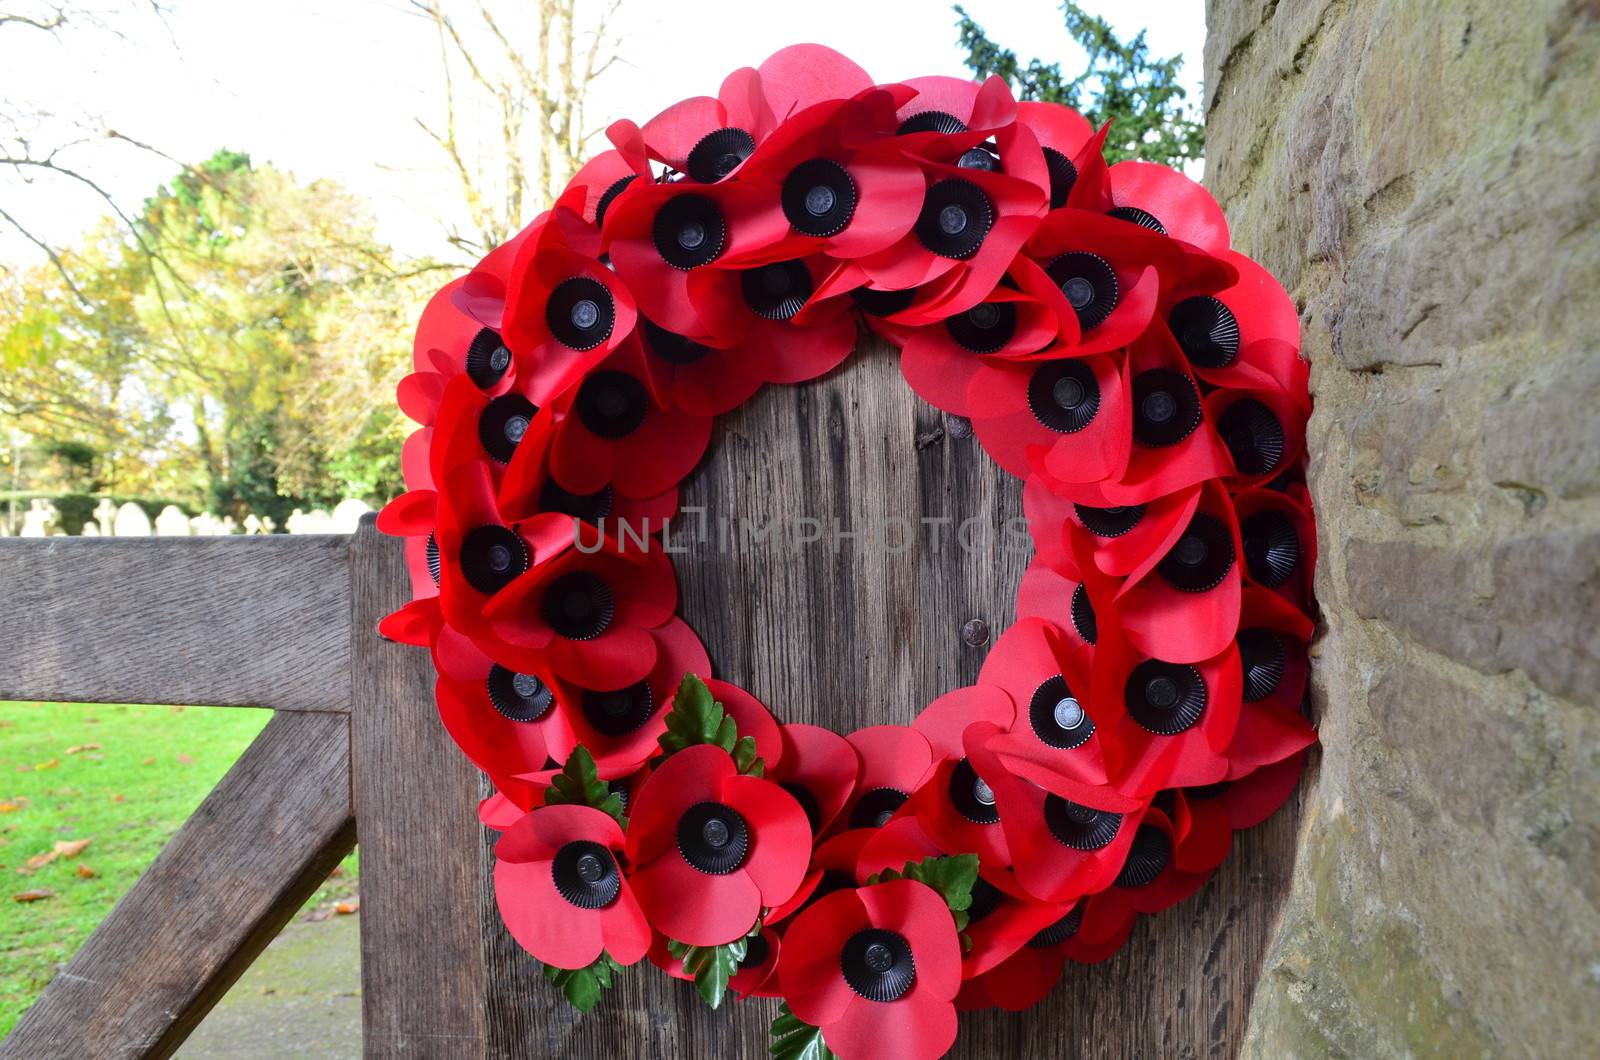 Poppy wreath at an English church to celebrate Remembrance Sunday.